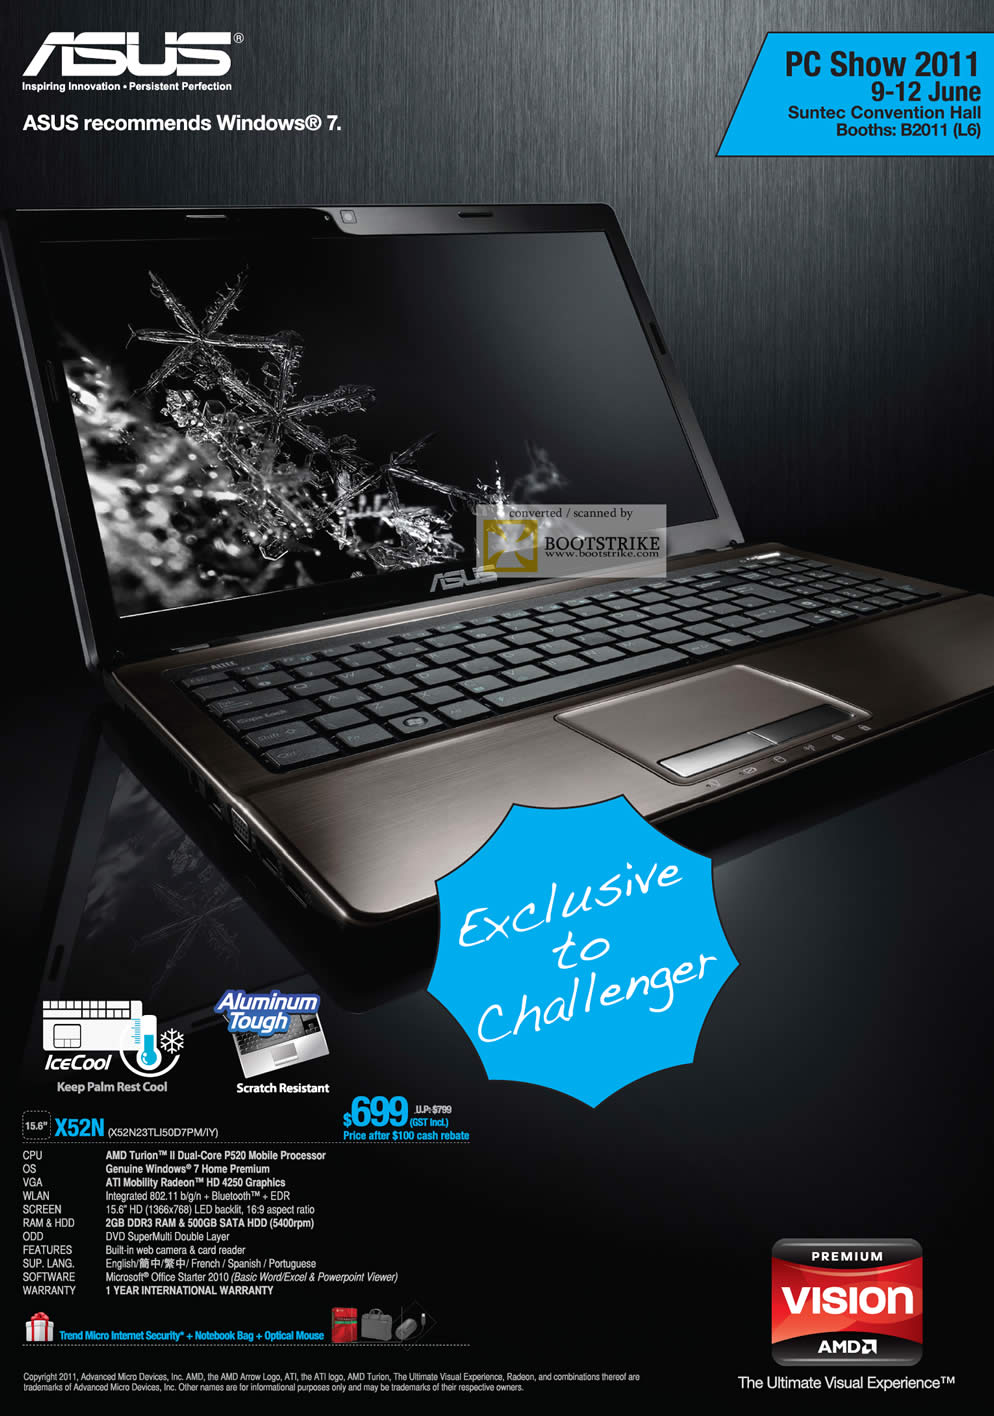 PC Show 2011 price list image brochure of ASUS Challenger Notebook X52N AMD